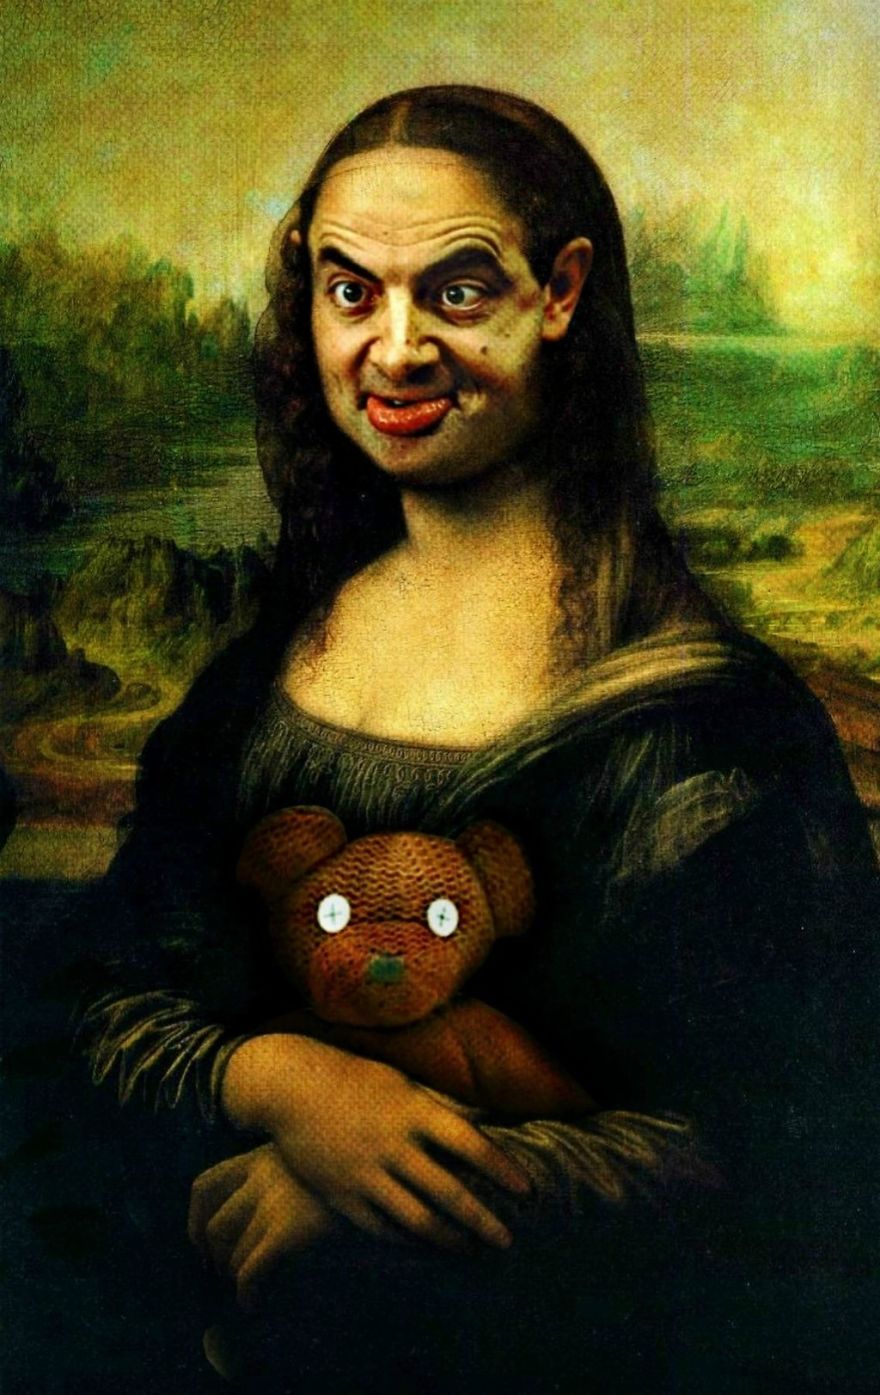 People Photoshopped Mr. Bean's Face Onto Things, And It is Hilarious